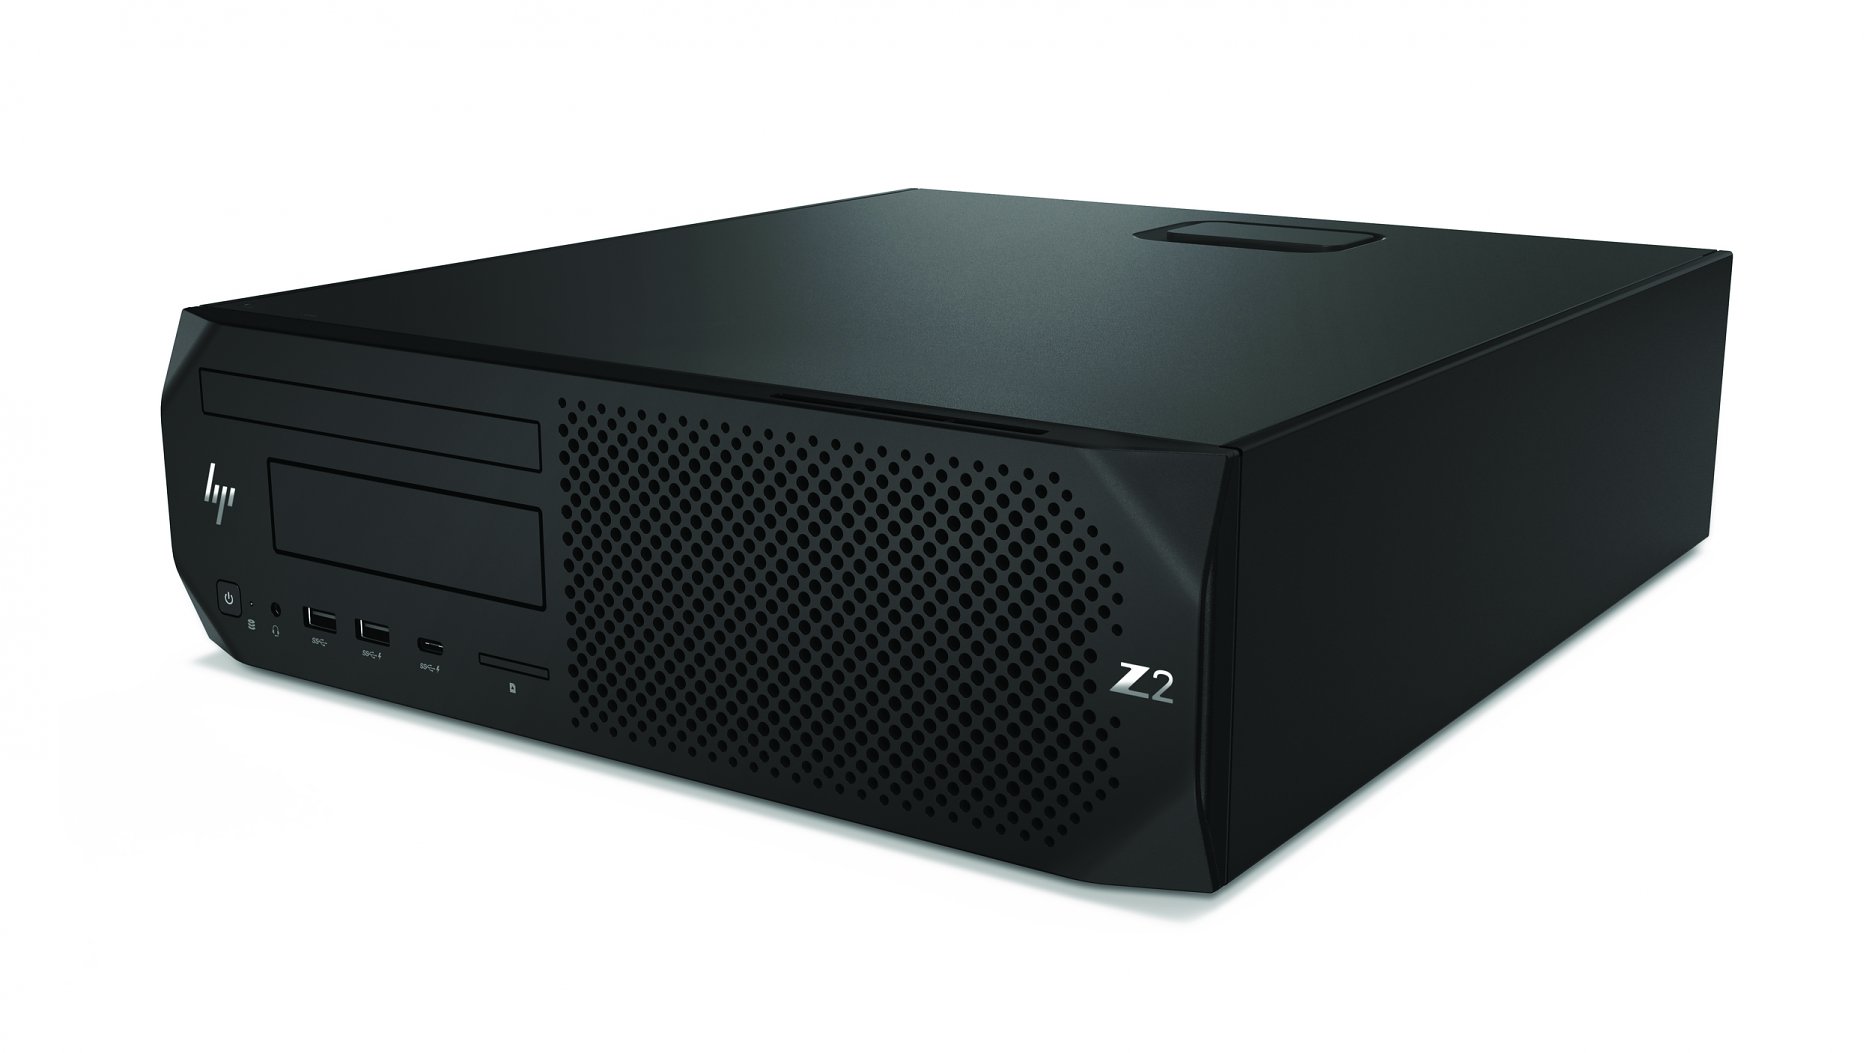 HP Z2 Small Form Factor (SFF) G4 Workstation